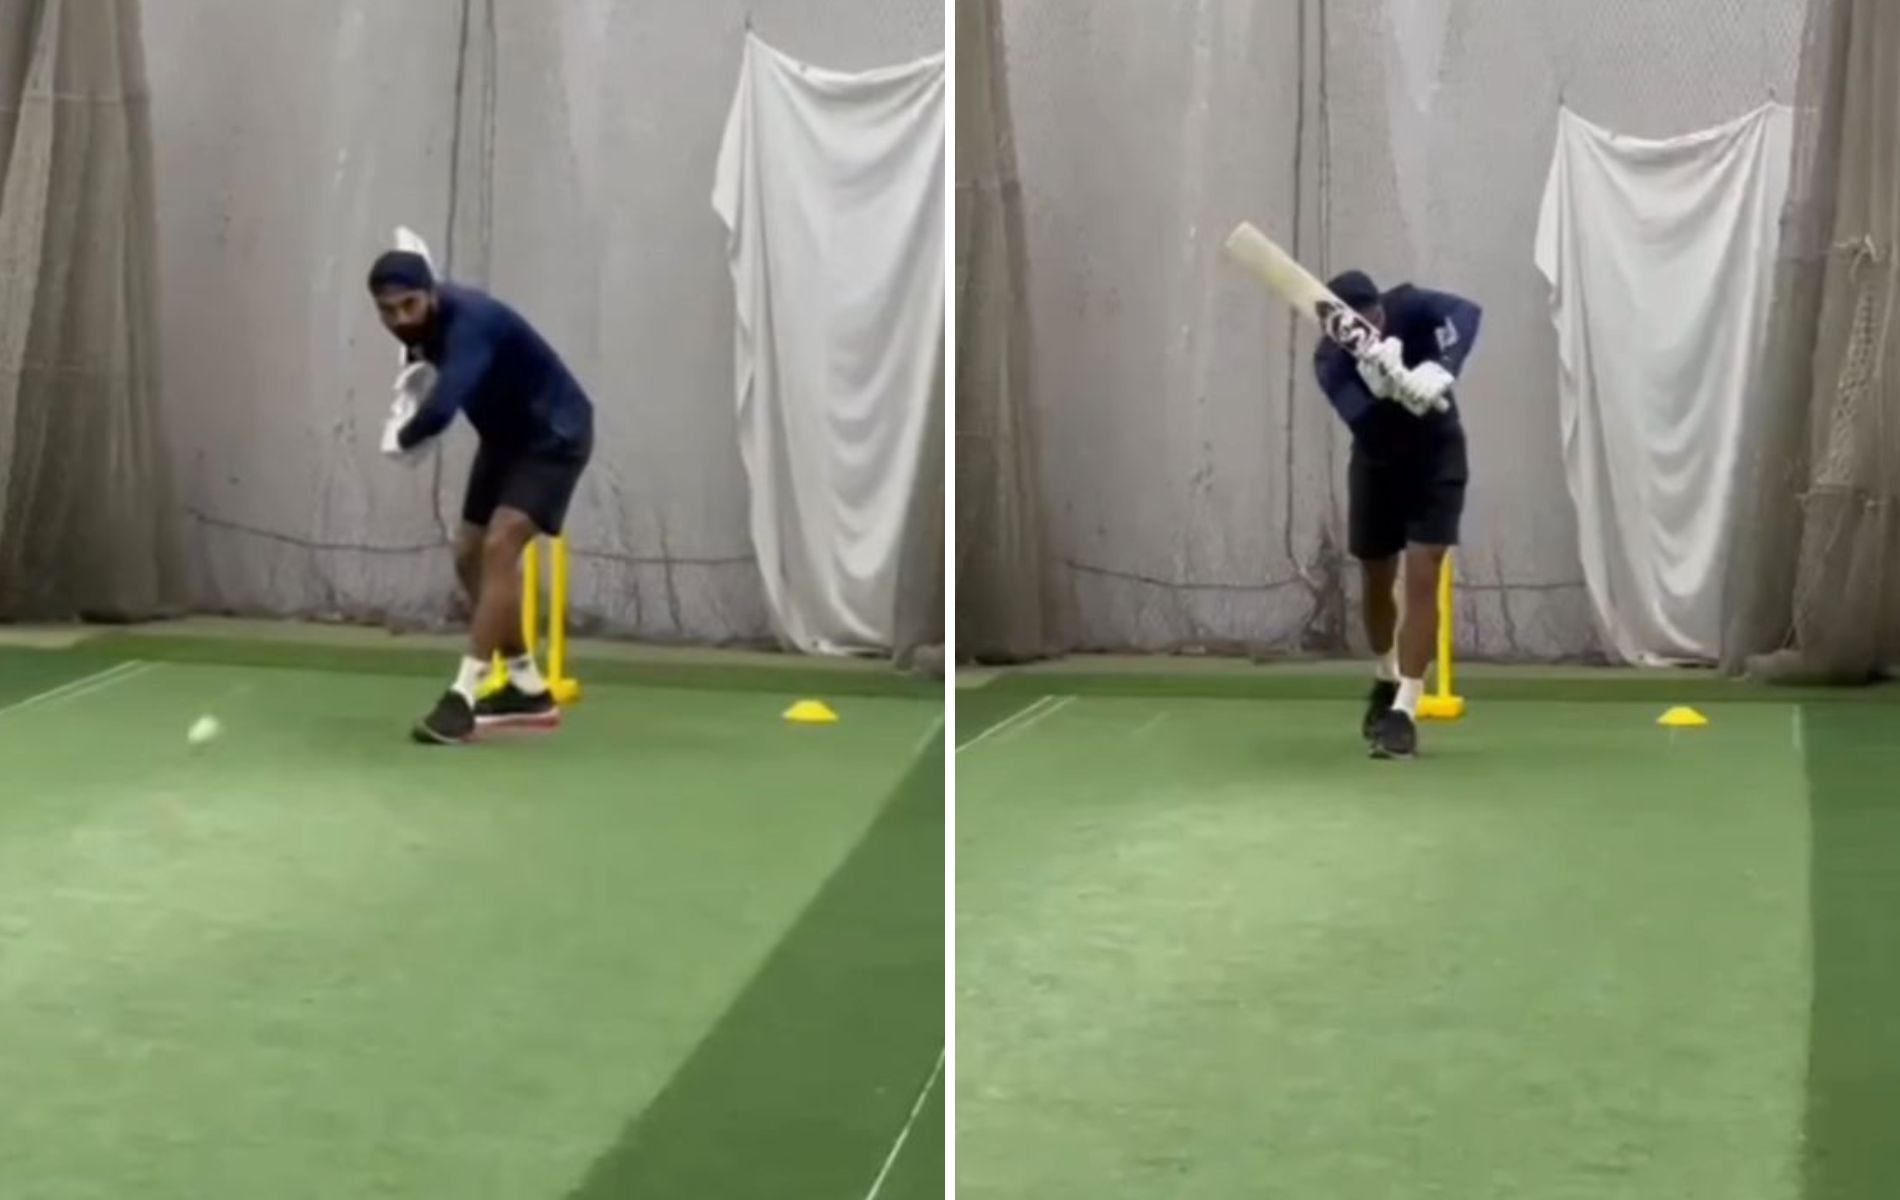 KL Rahul during a recent practice session. (Pics: Instagram)